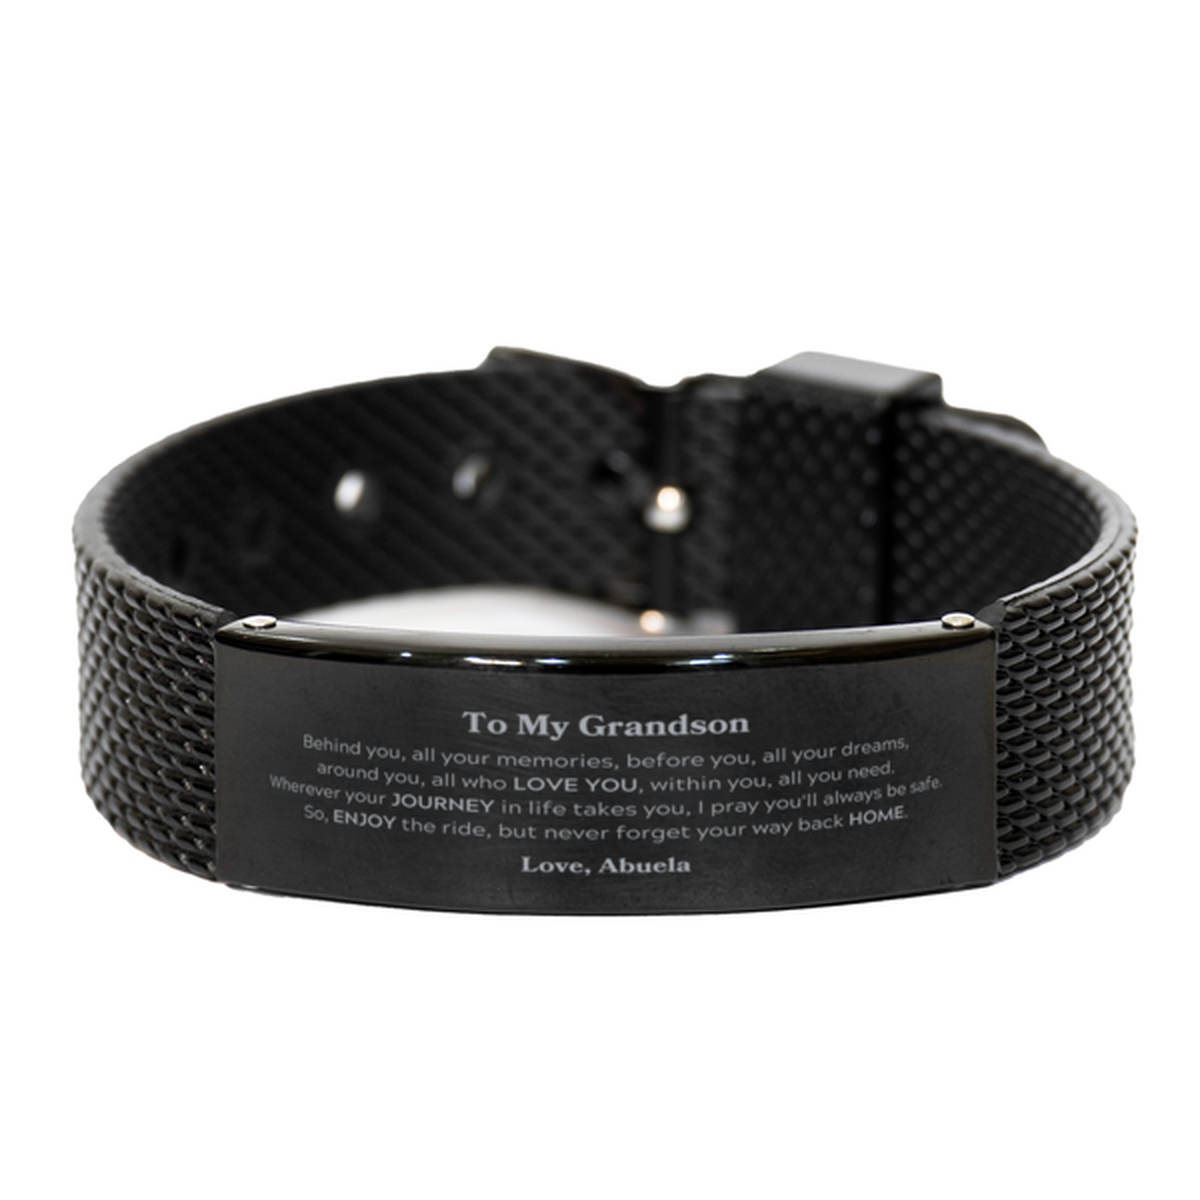 To My Grandson Graduation Gifts from Abuela, Grandson Black Shark Mesh Bracelet Christmas Birthday Gifts for Grandson Behind you, all your memories, before you, all your dreams. Love, Abuela